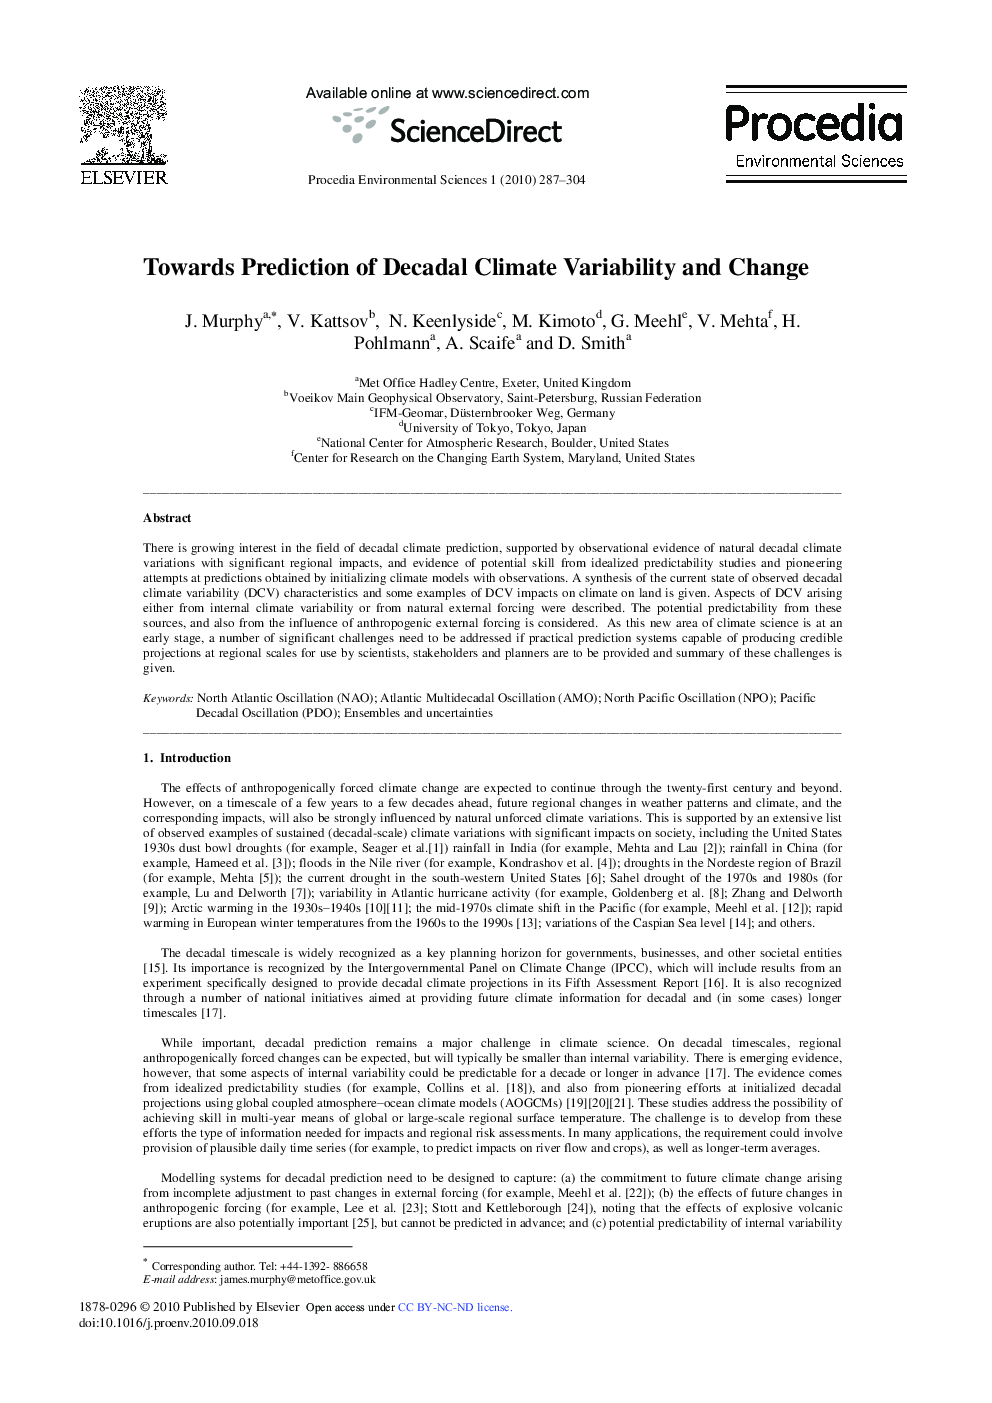 Towards Prediction of Decadal Climate Variability and Change